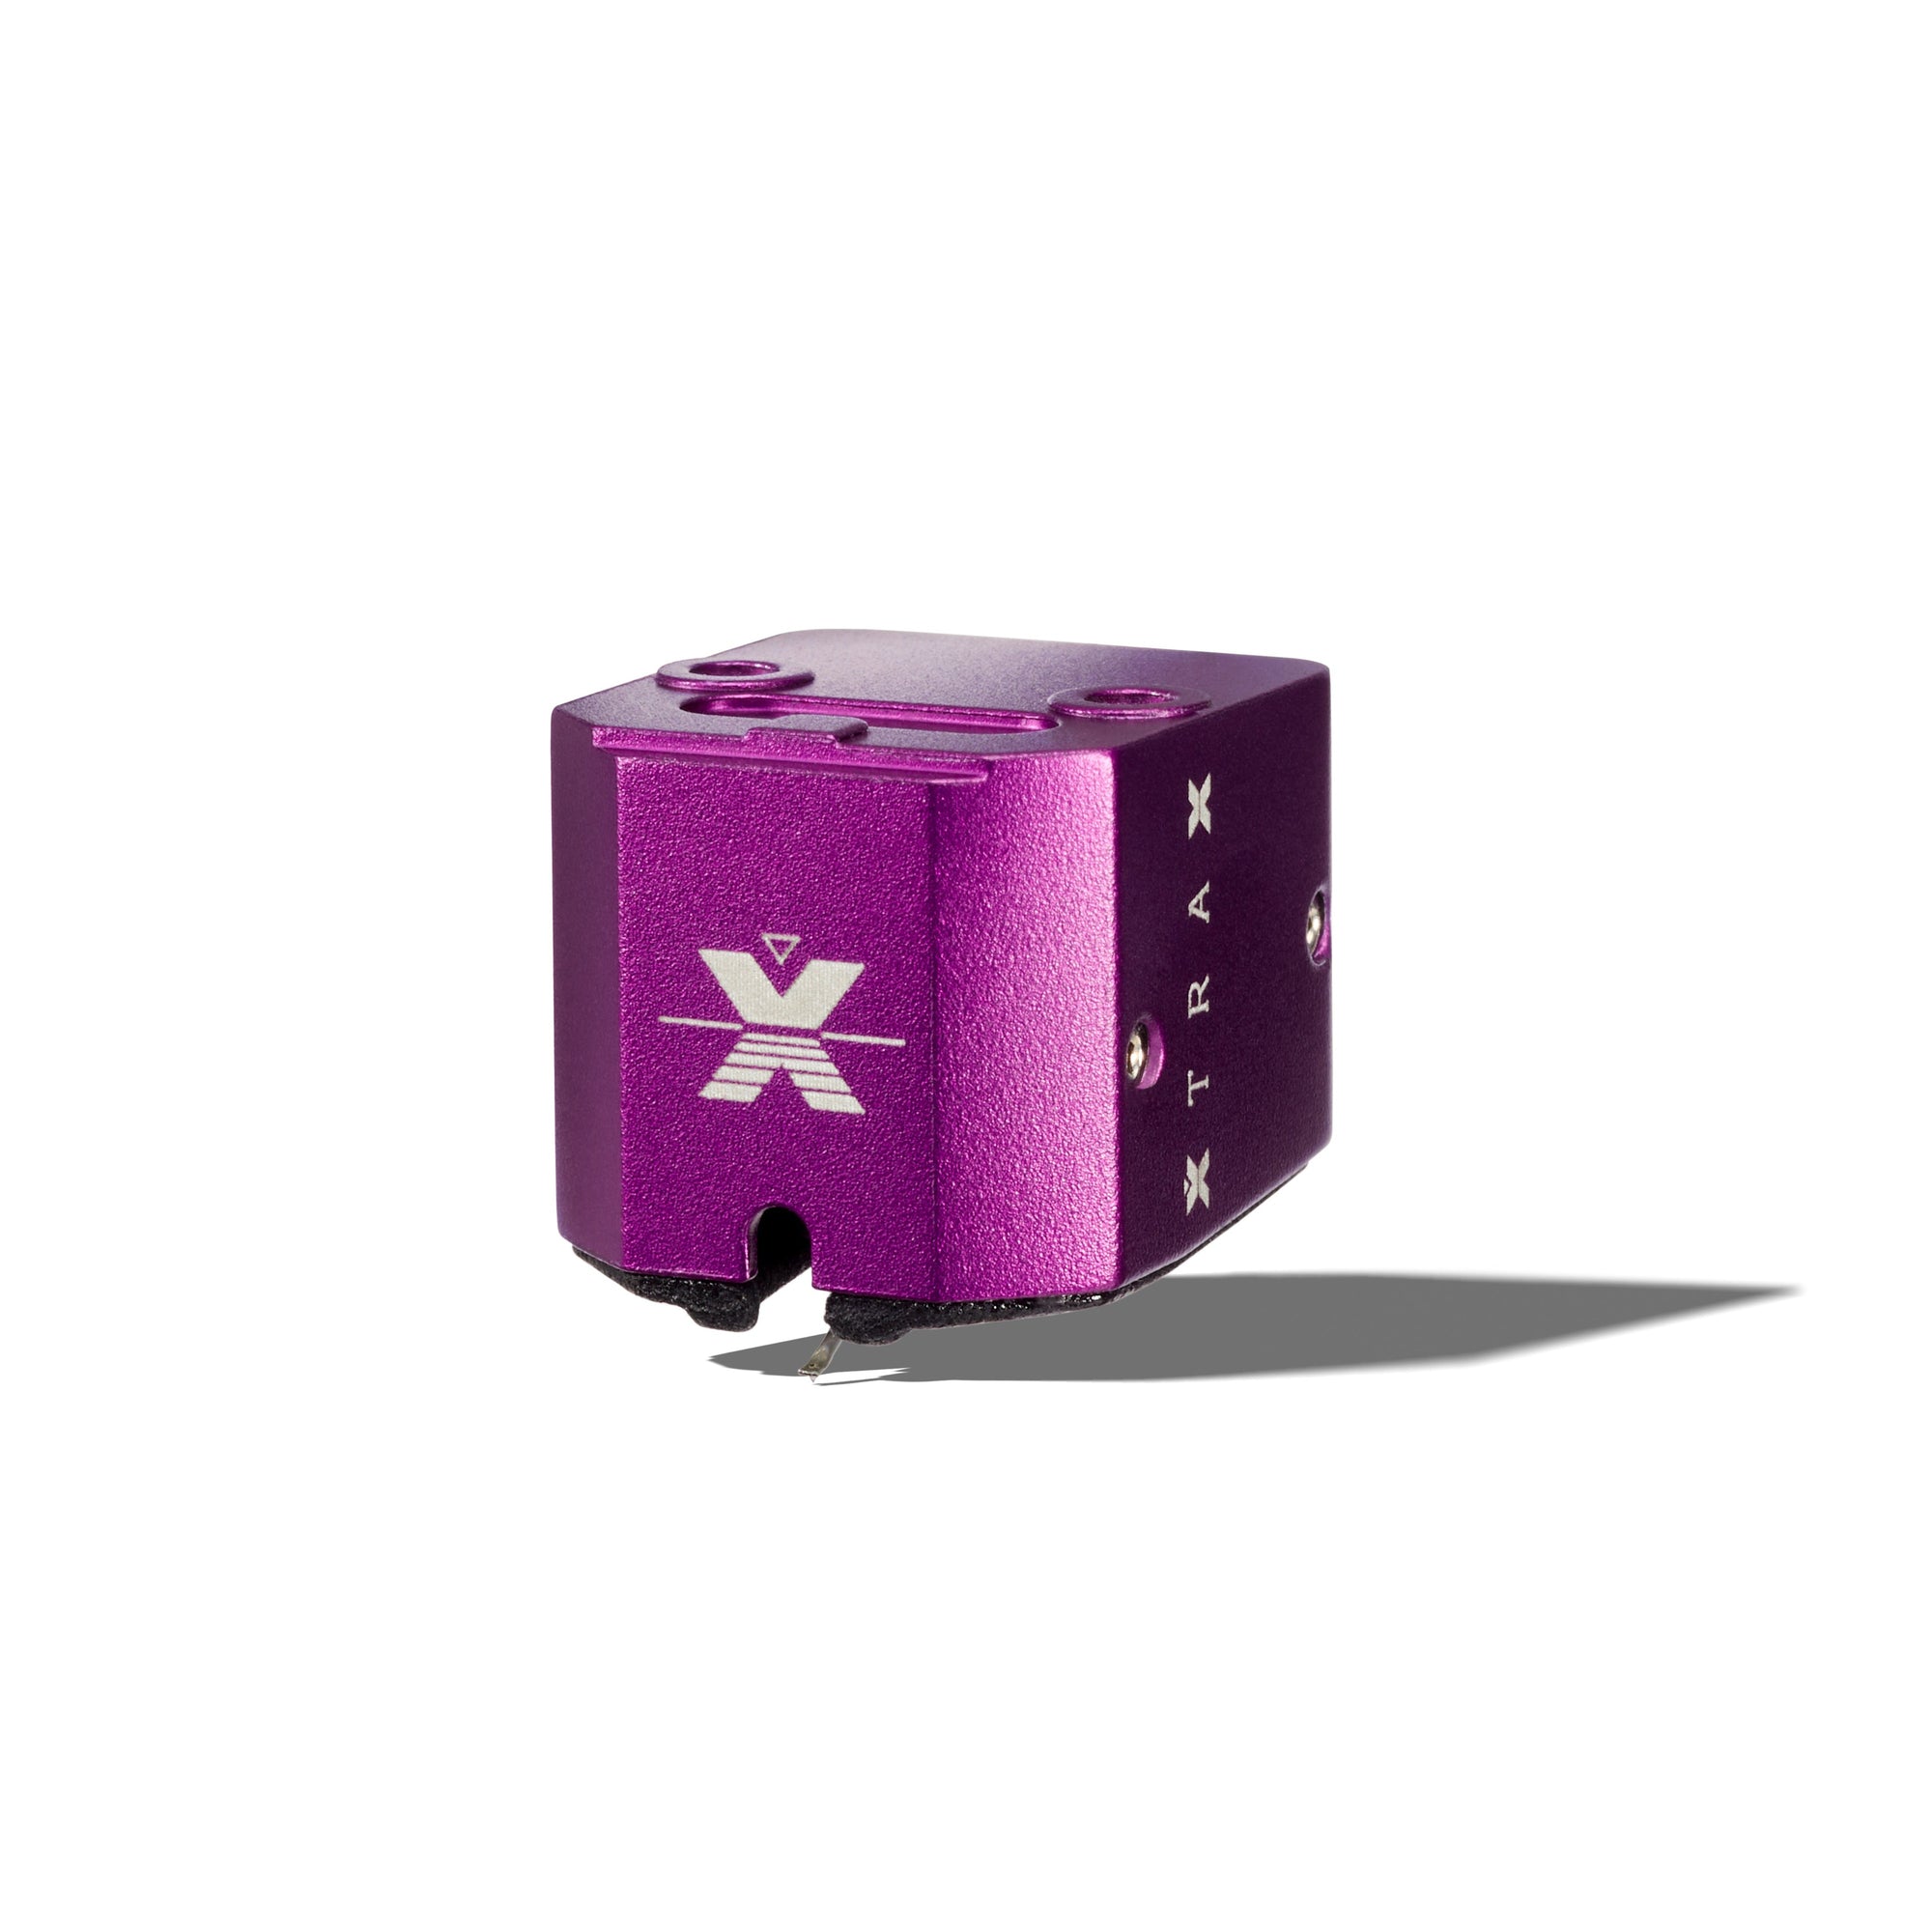 Vertere - XtraX - High-Resolution Moving Coil Turntable Cartridge